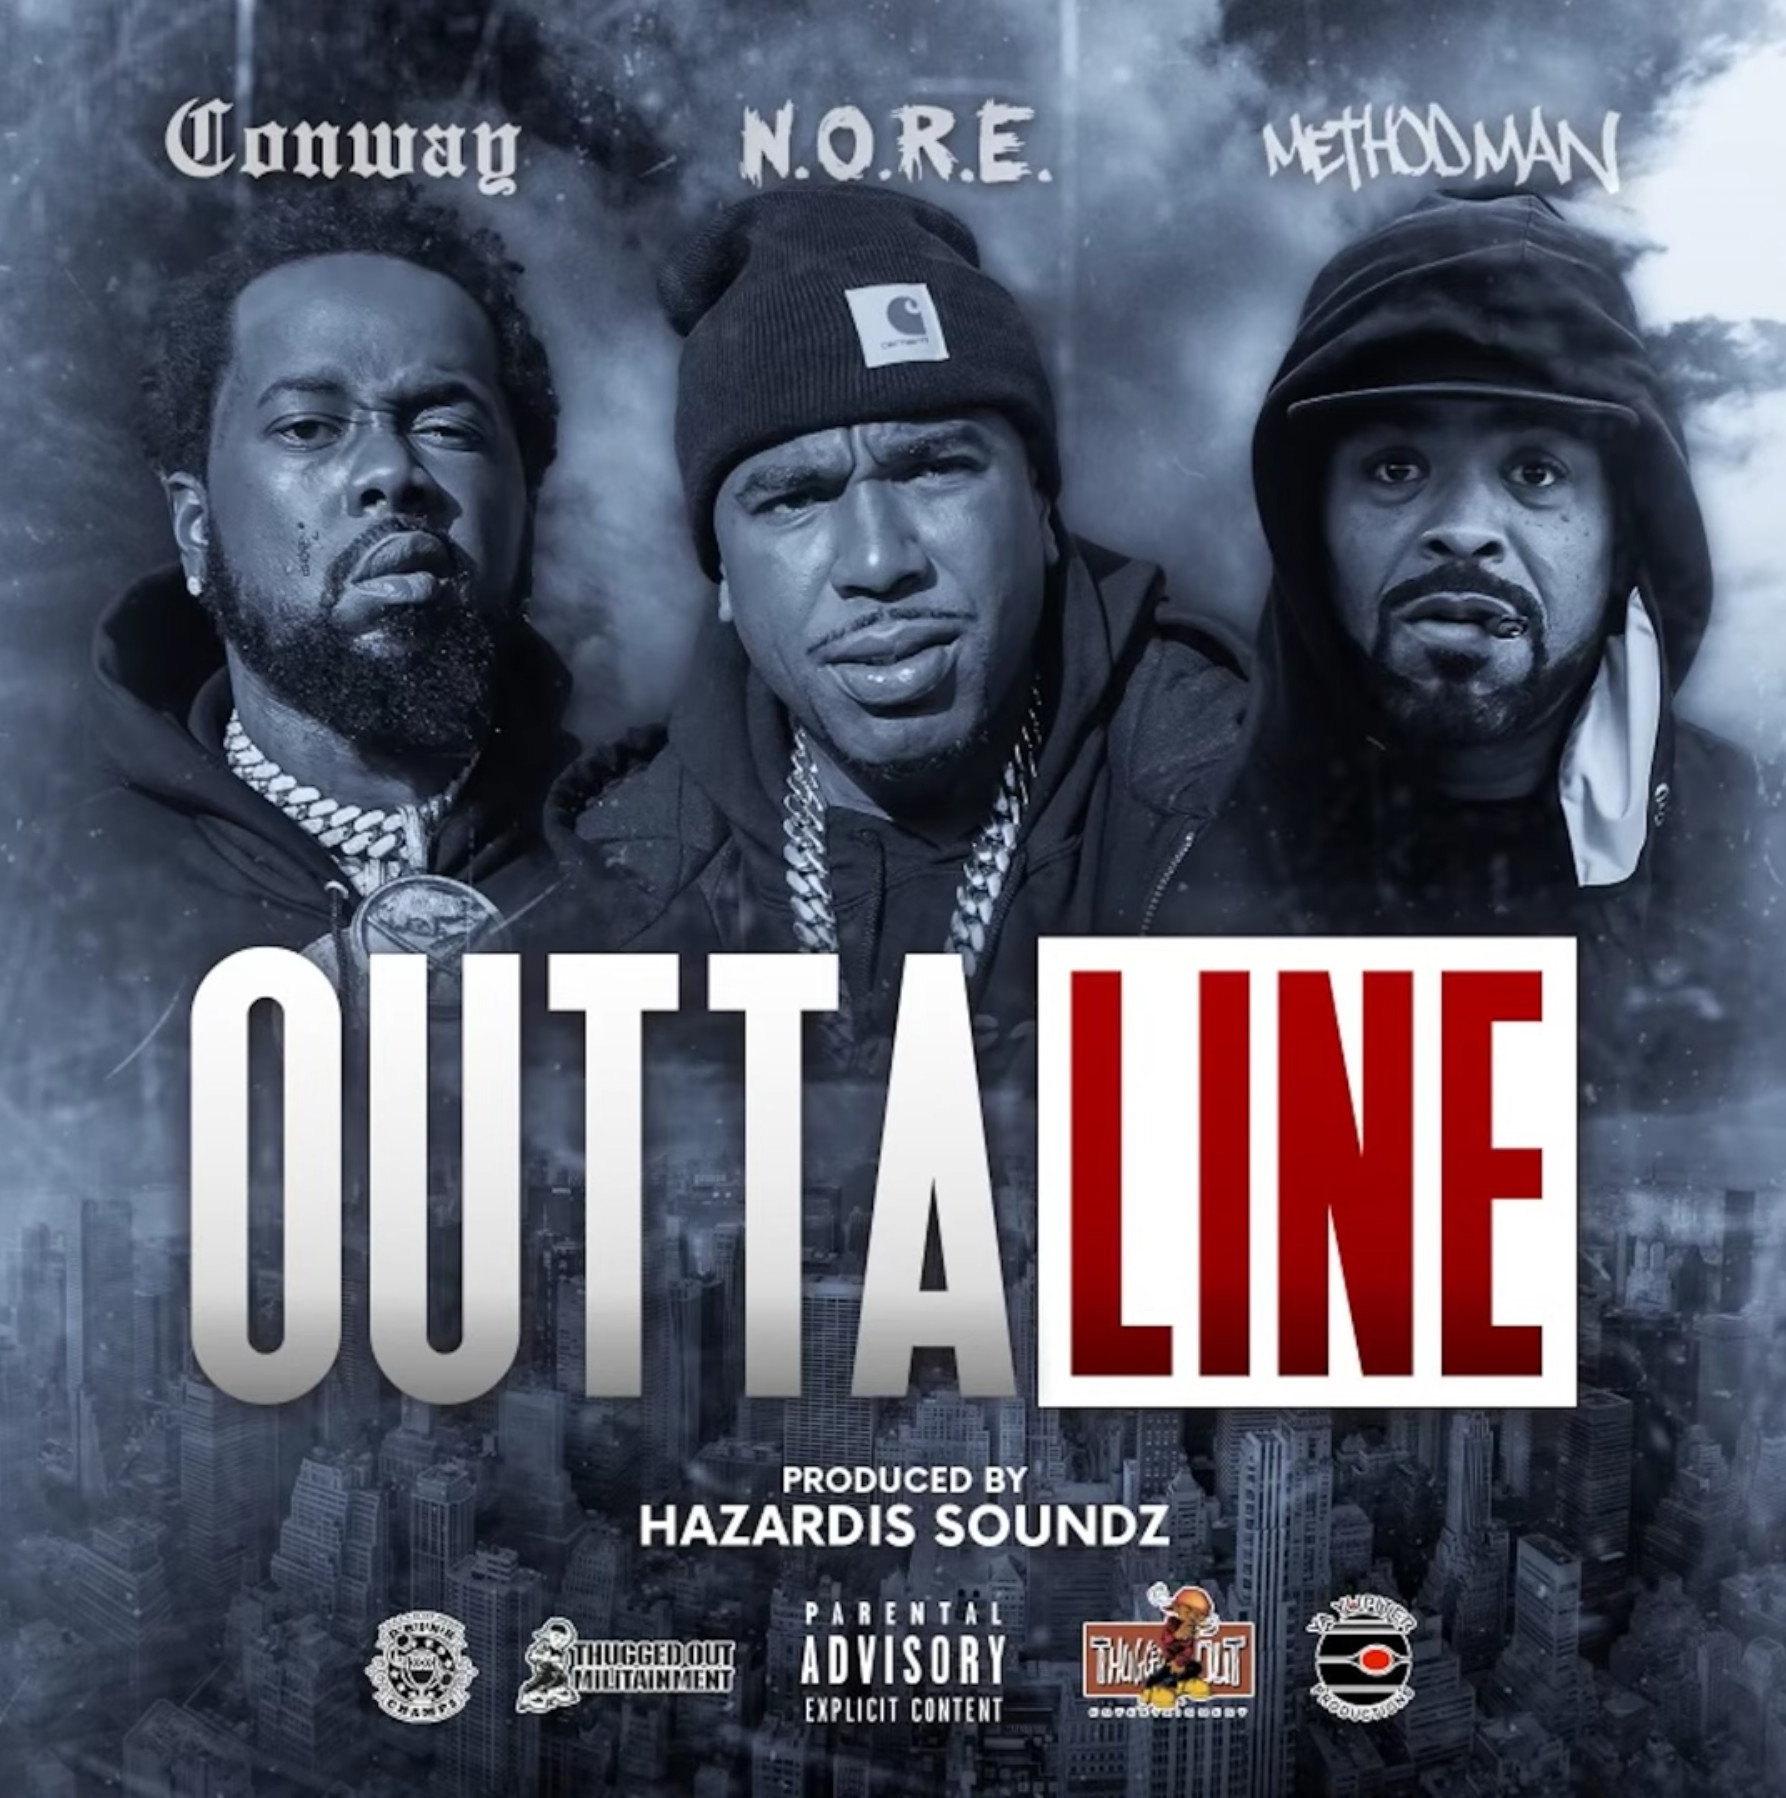 N.O.R.E, Conway The Machine, & Method Man Snap On “Outta Line”